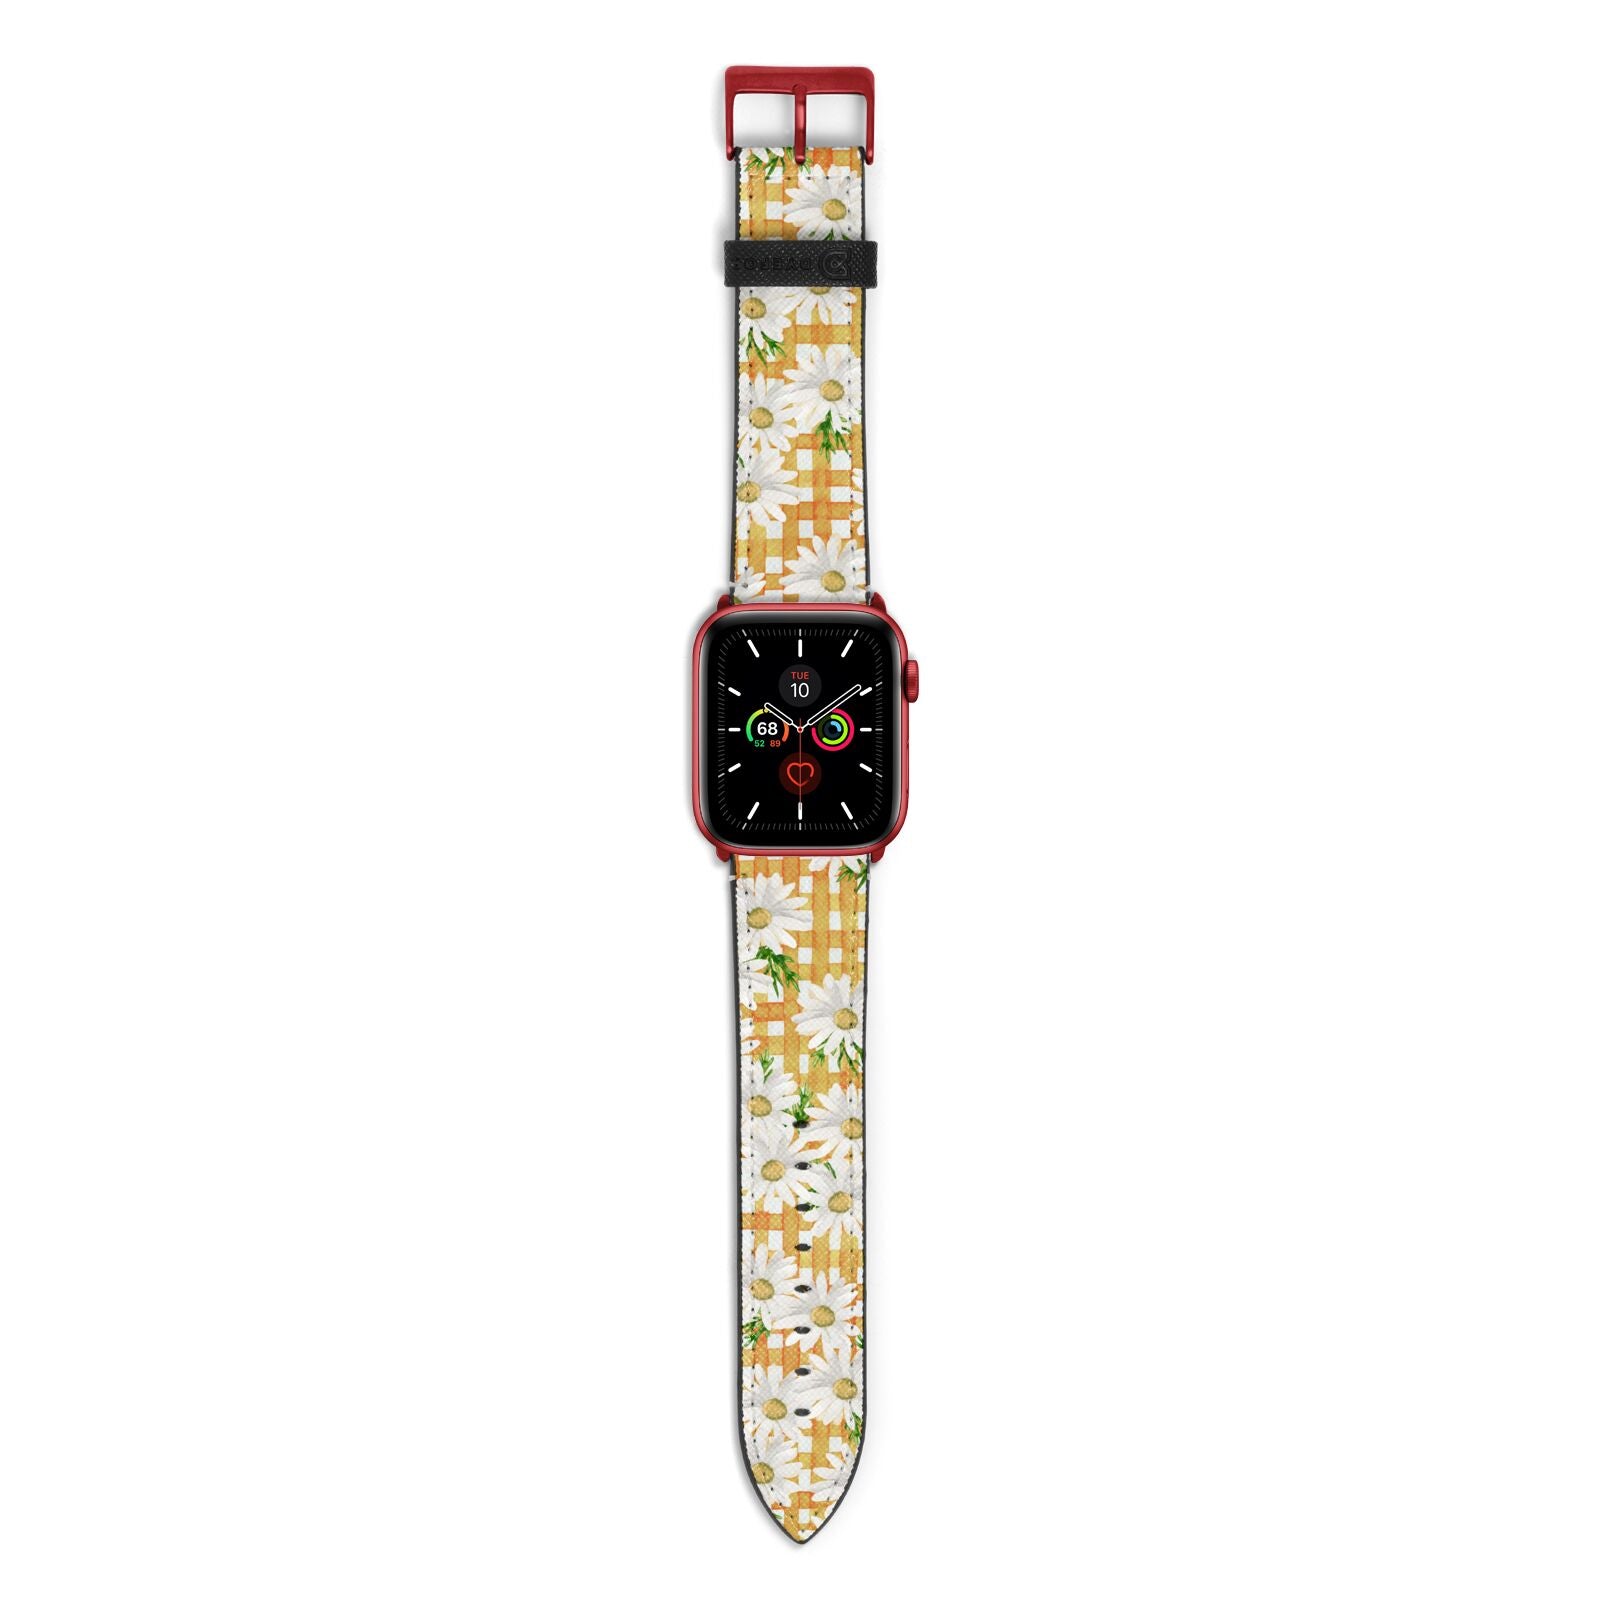 Checkered Daisy Apple Watch Strap with Red Hardware